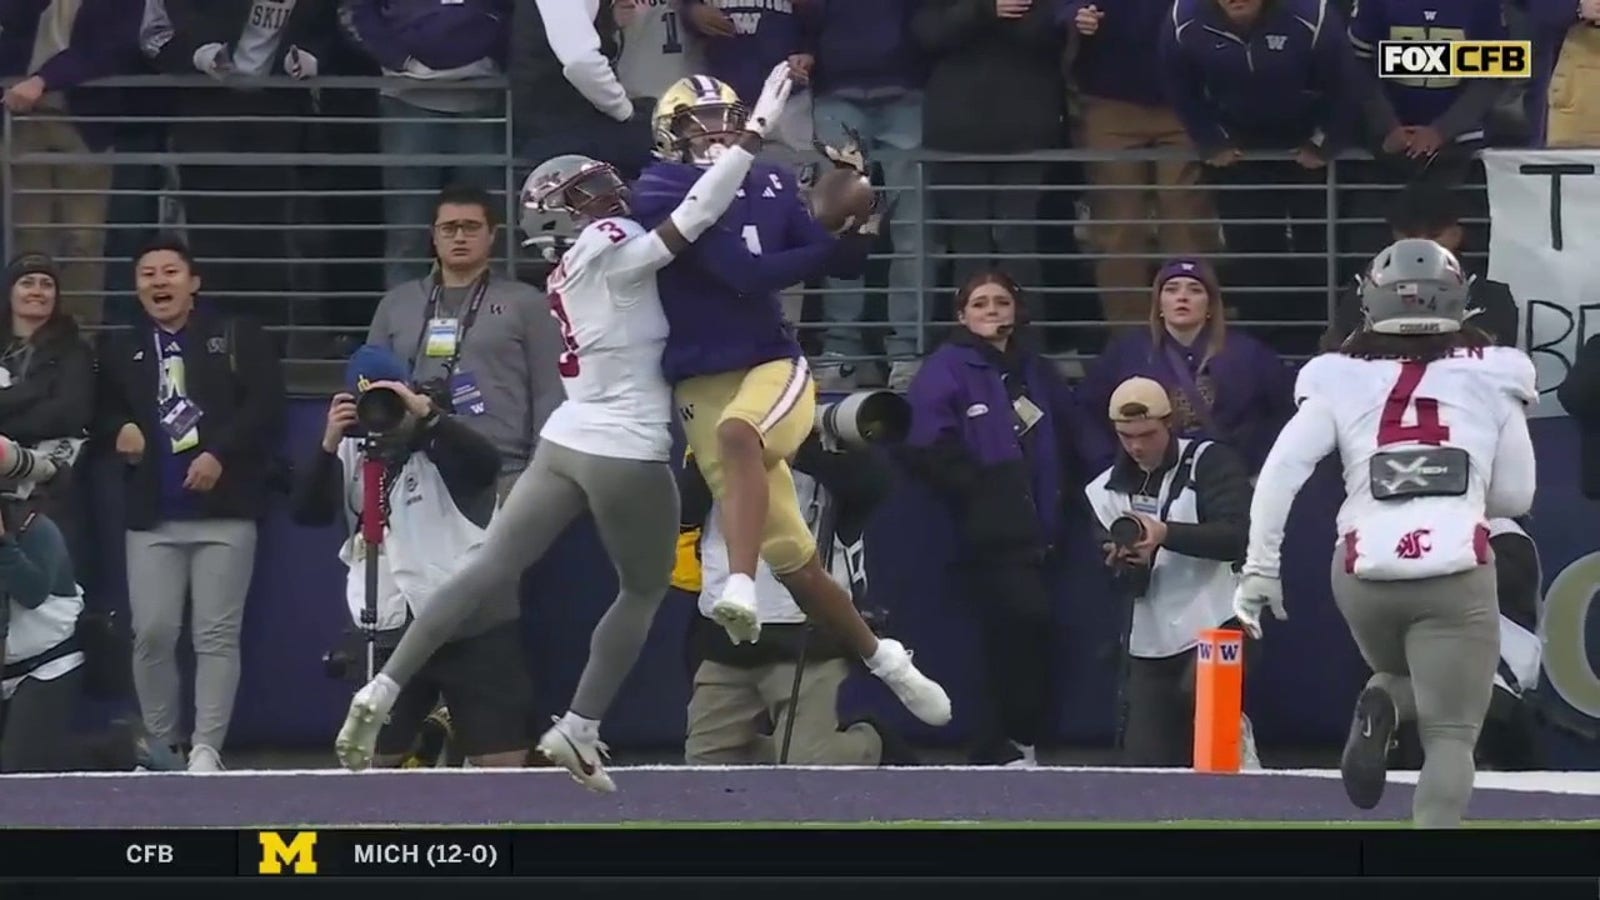 Rome Odunze hauls in his second TD of the game to give Washington the lead against Washington State